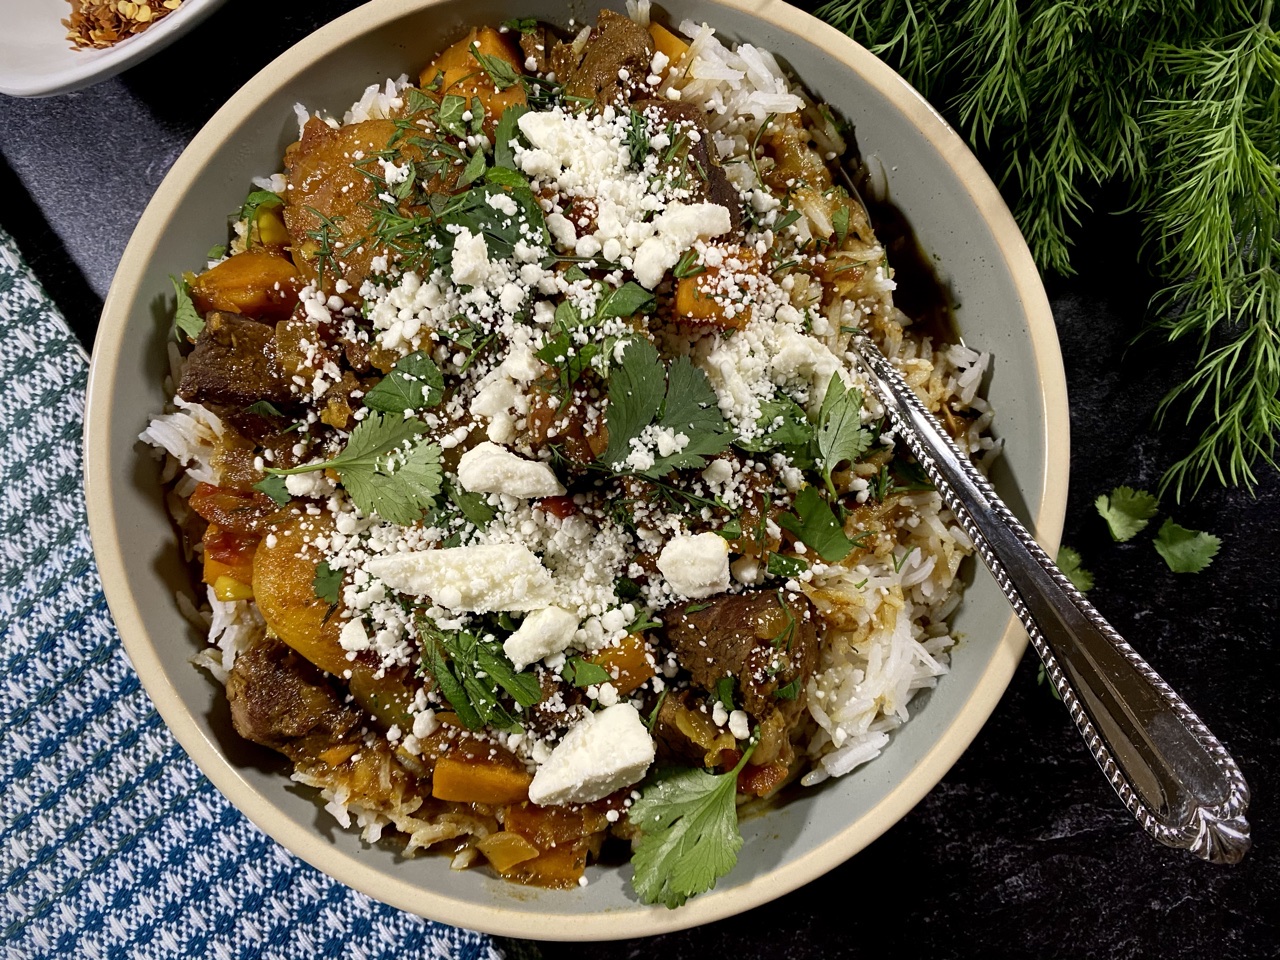 7AE8E4CB 823D 497C B9D5 C4BB7EDBF6E8 - Persian Style Lamb & Sweet Potato Stew with Apricots & Herbs